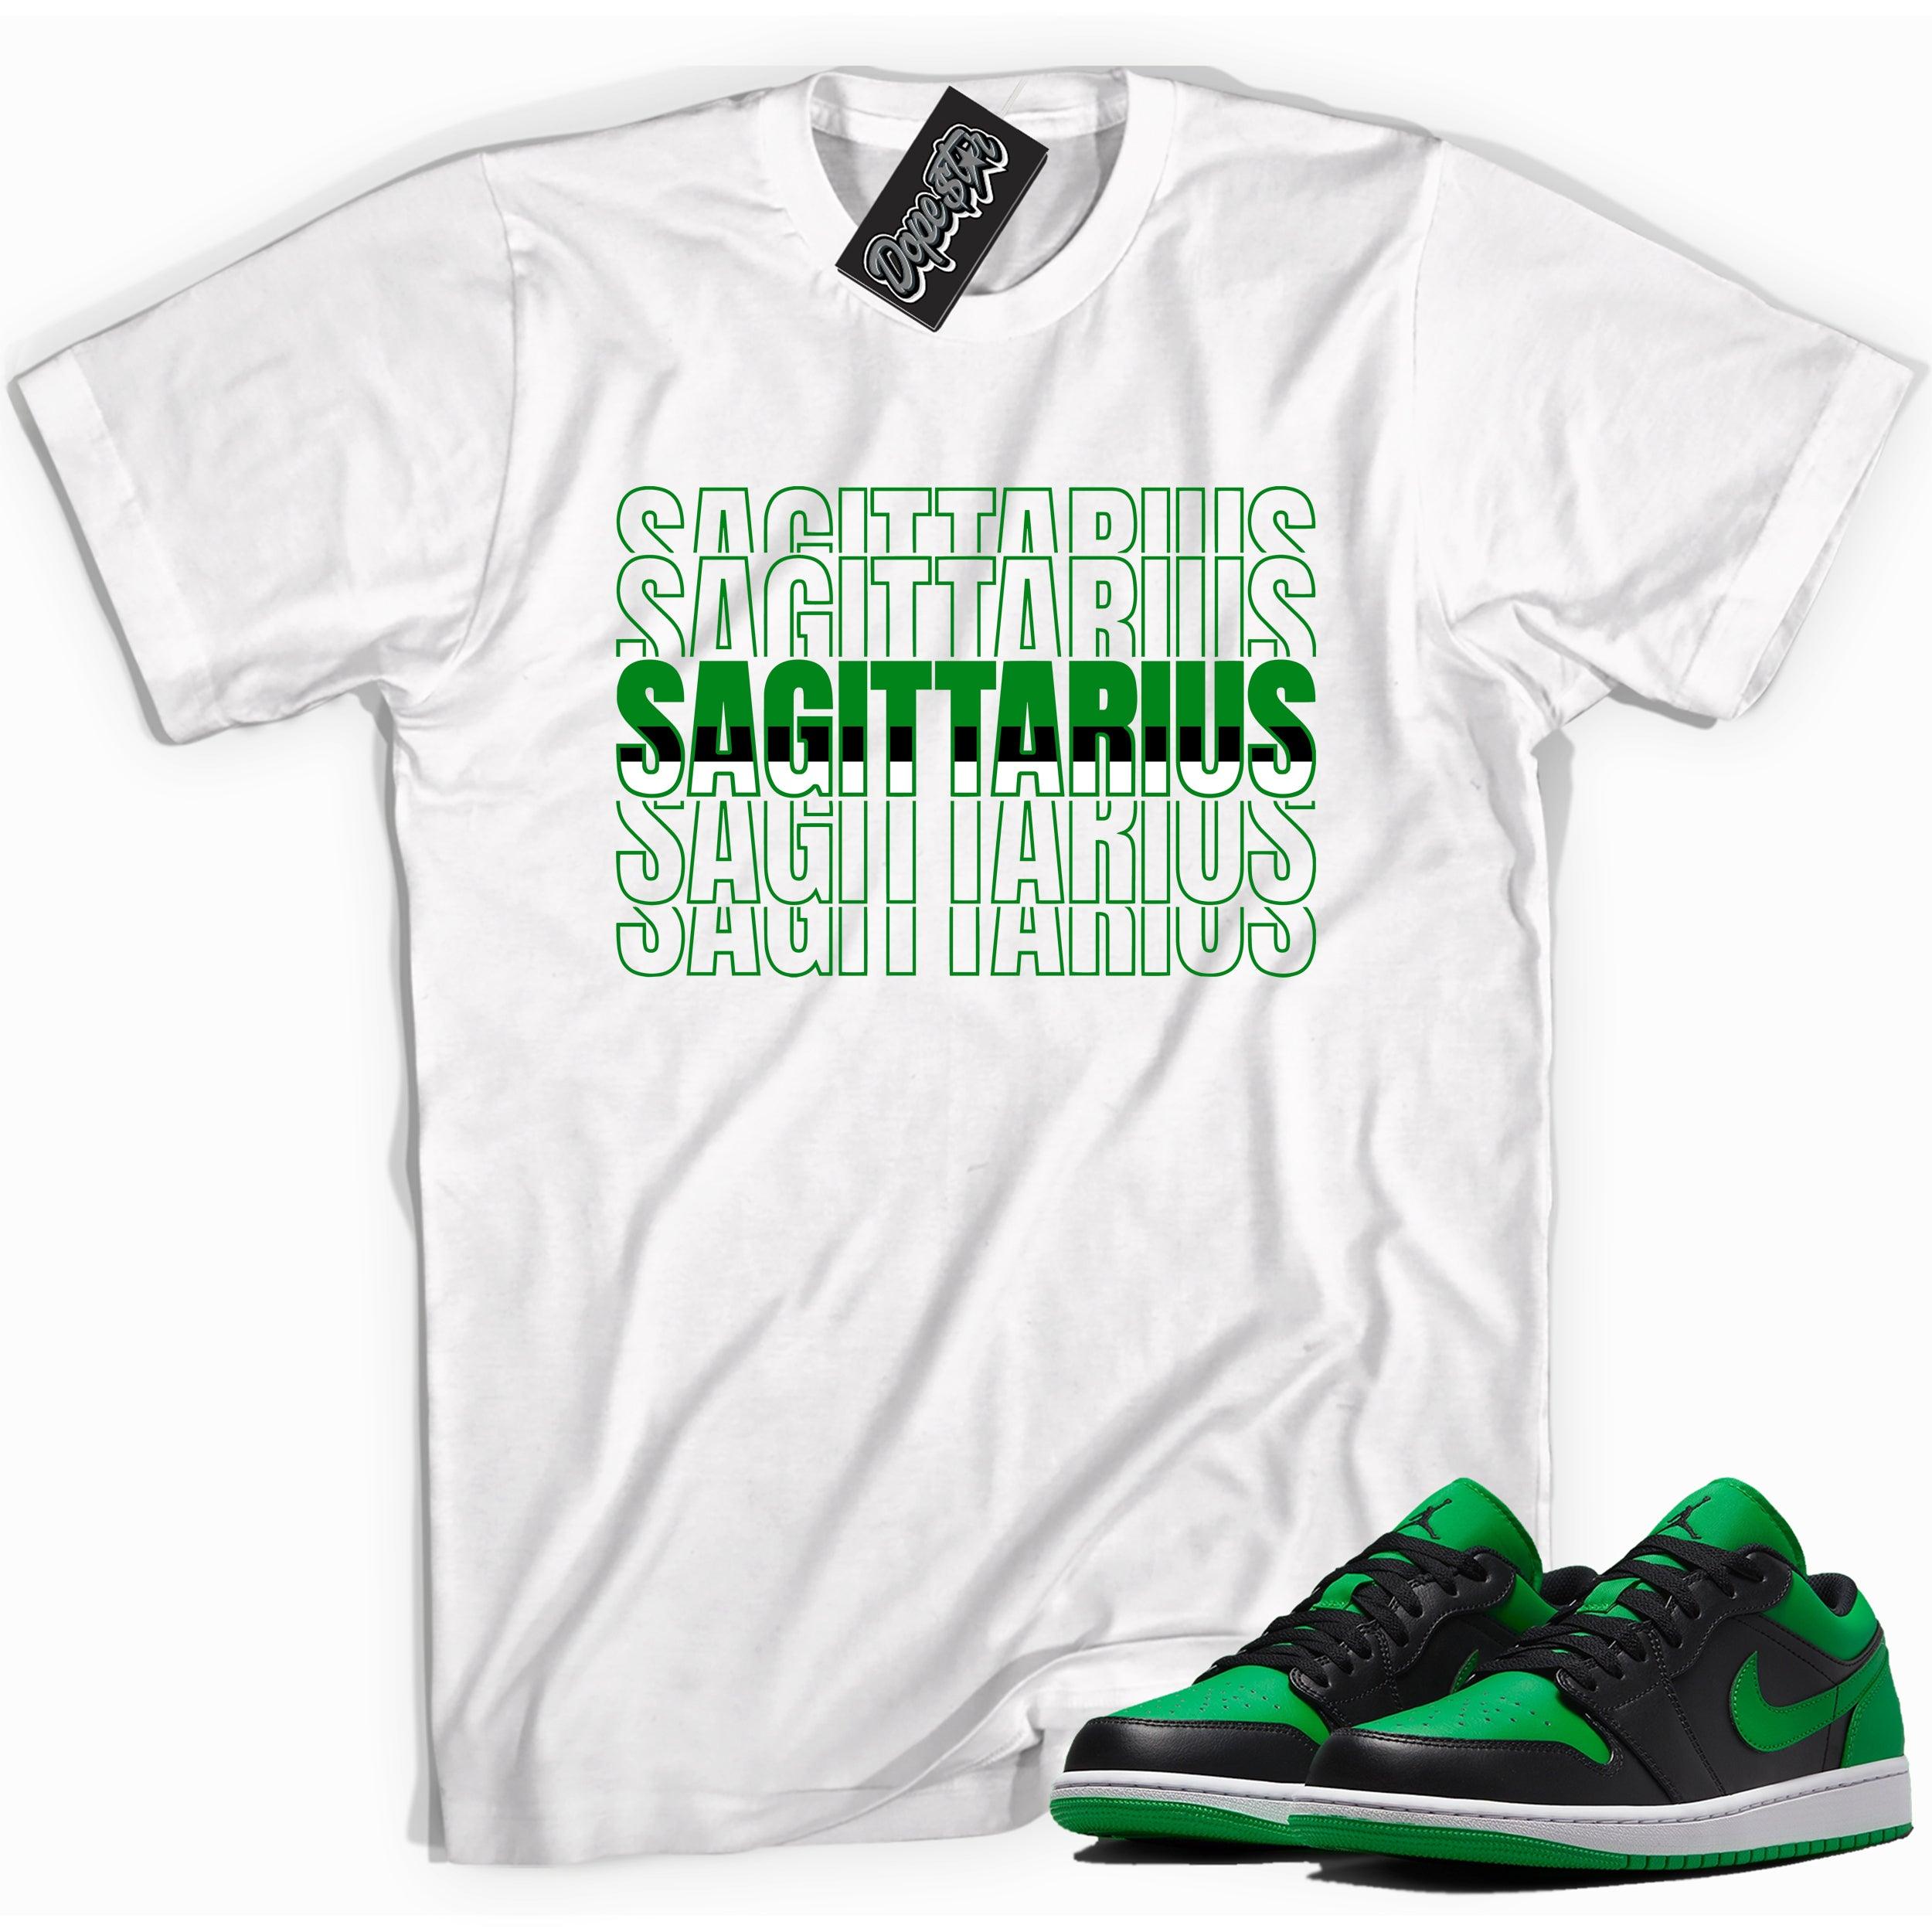 Cool white graphic tee with 'sagittarius' print, that perfectly matches Air Jordan 1 Low Lucky Green sneakers